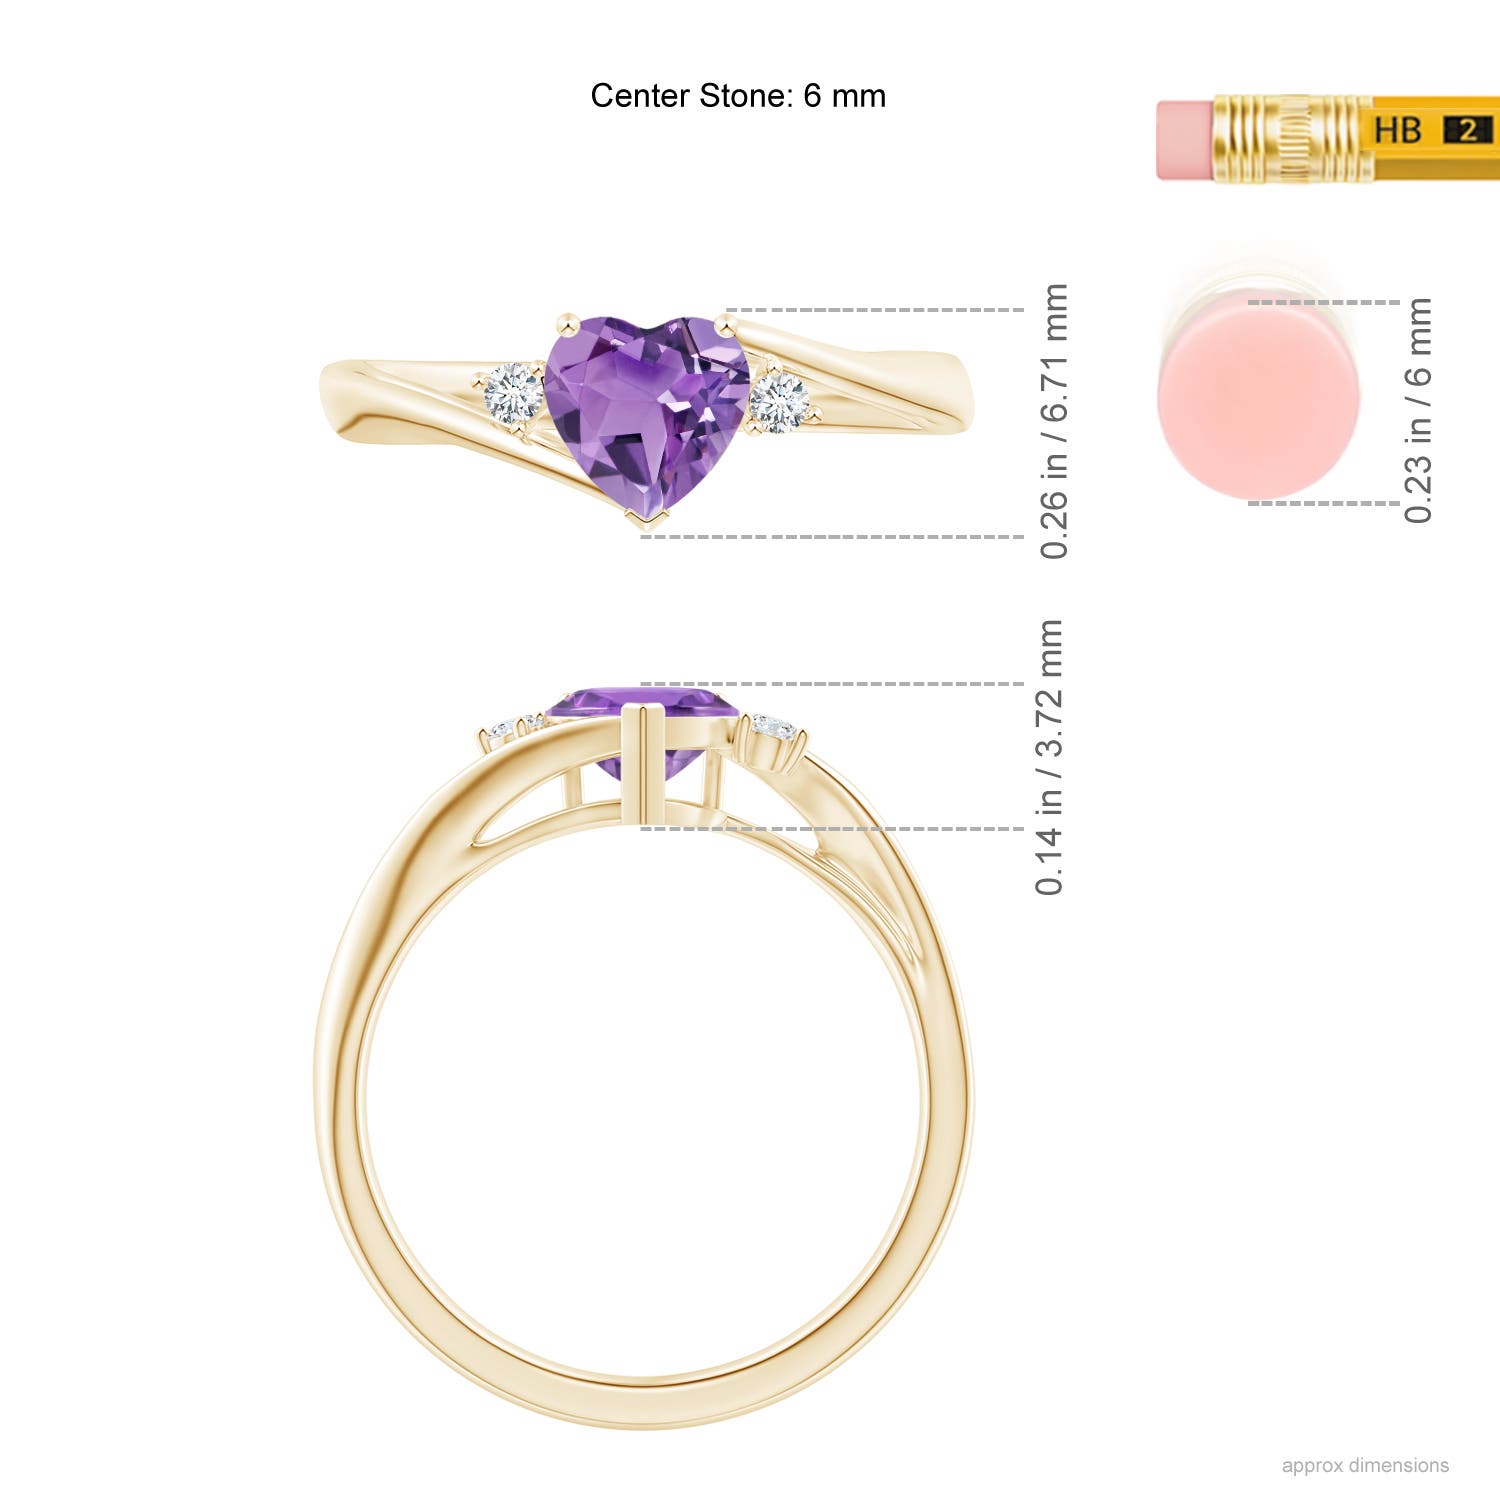 A - Amethyst / 0.75 CT / 14 KT Yellow Gold